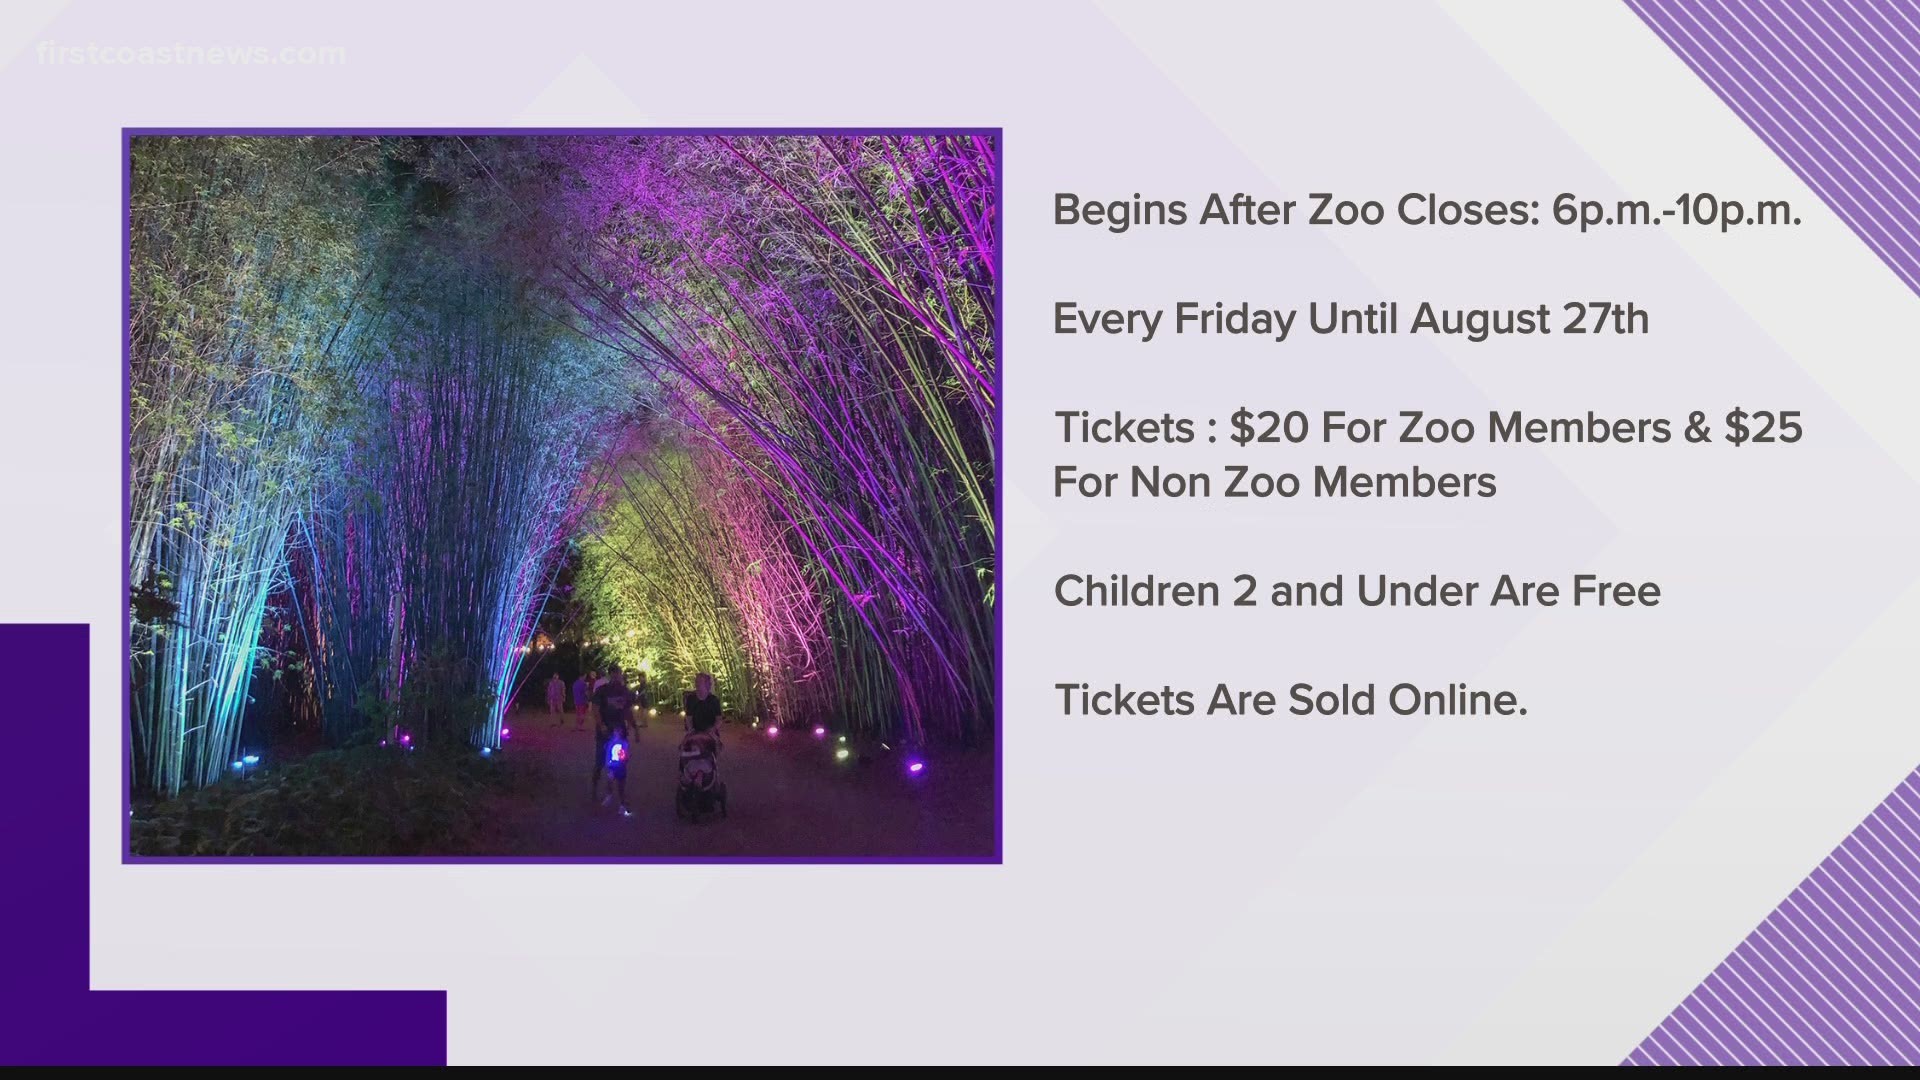 The IllumiZoo Summer Spectacle will begin at 6 p.m. every Friday night and continue until 10 p.m.